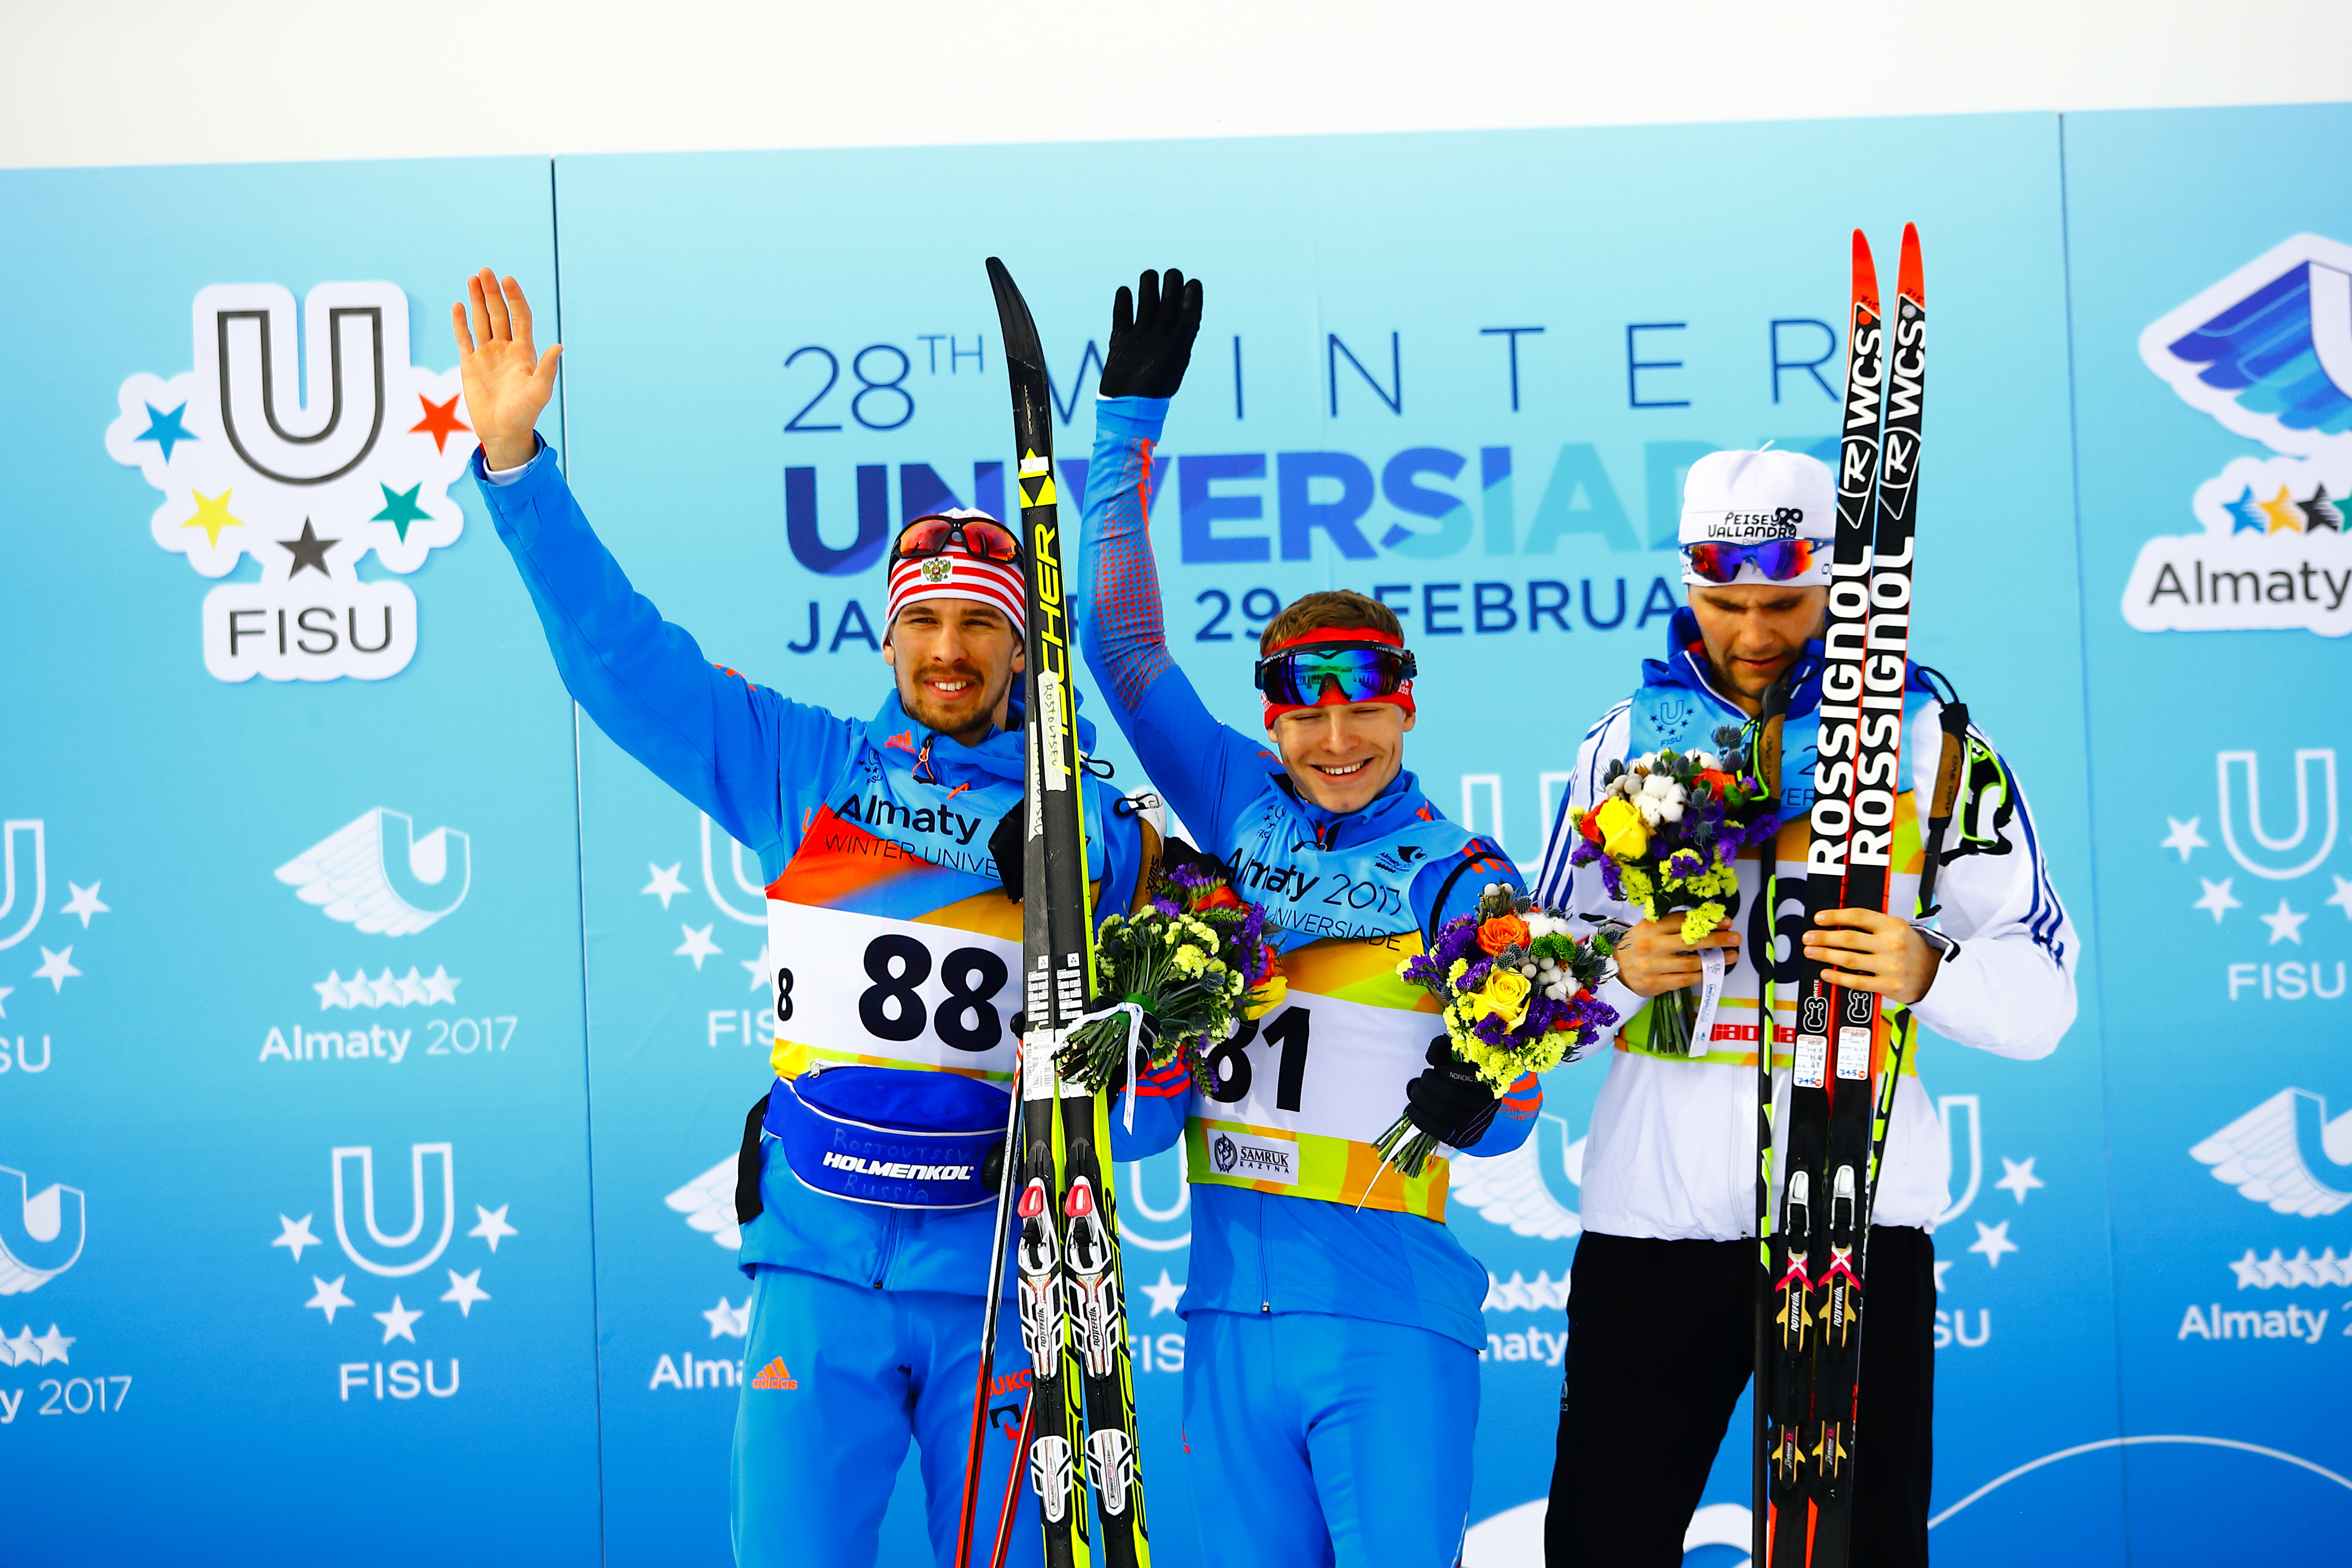 Dmitriy Rostovtsev and Valeriy Gontar of Russia (l, c) and Alexandre Pouye of France on the podium for the men's 10 k classic at 2017 World University Games in Almaty, Kazakhstan. (Photo: Almaty2017.com)